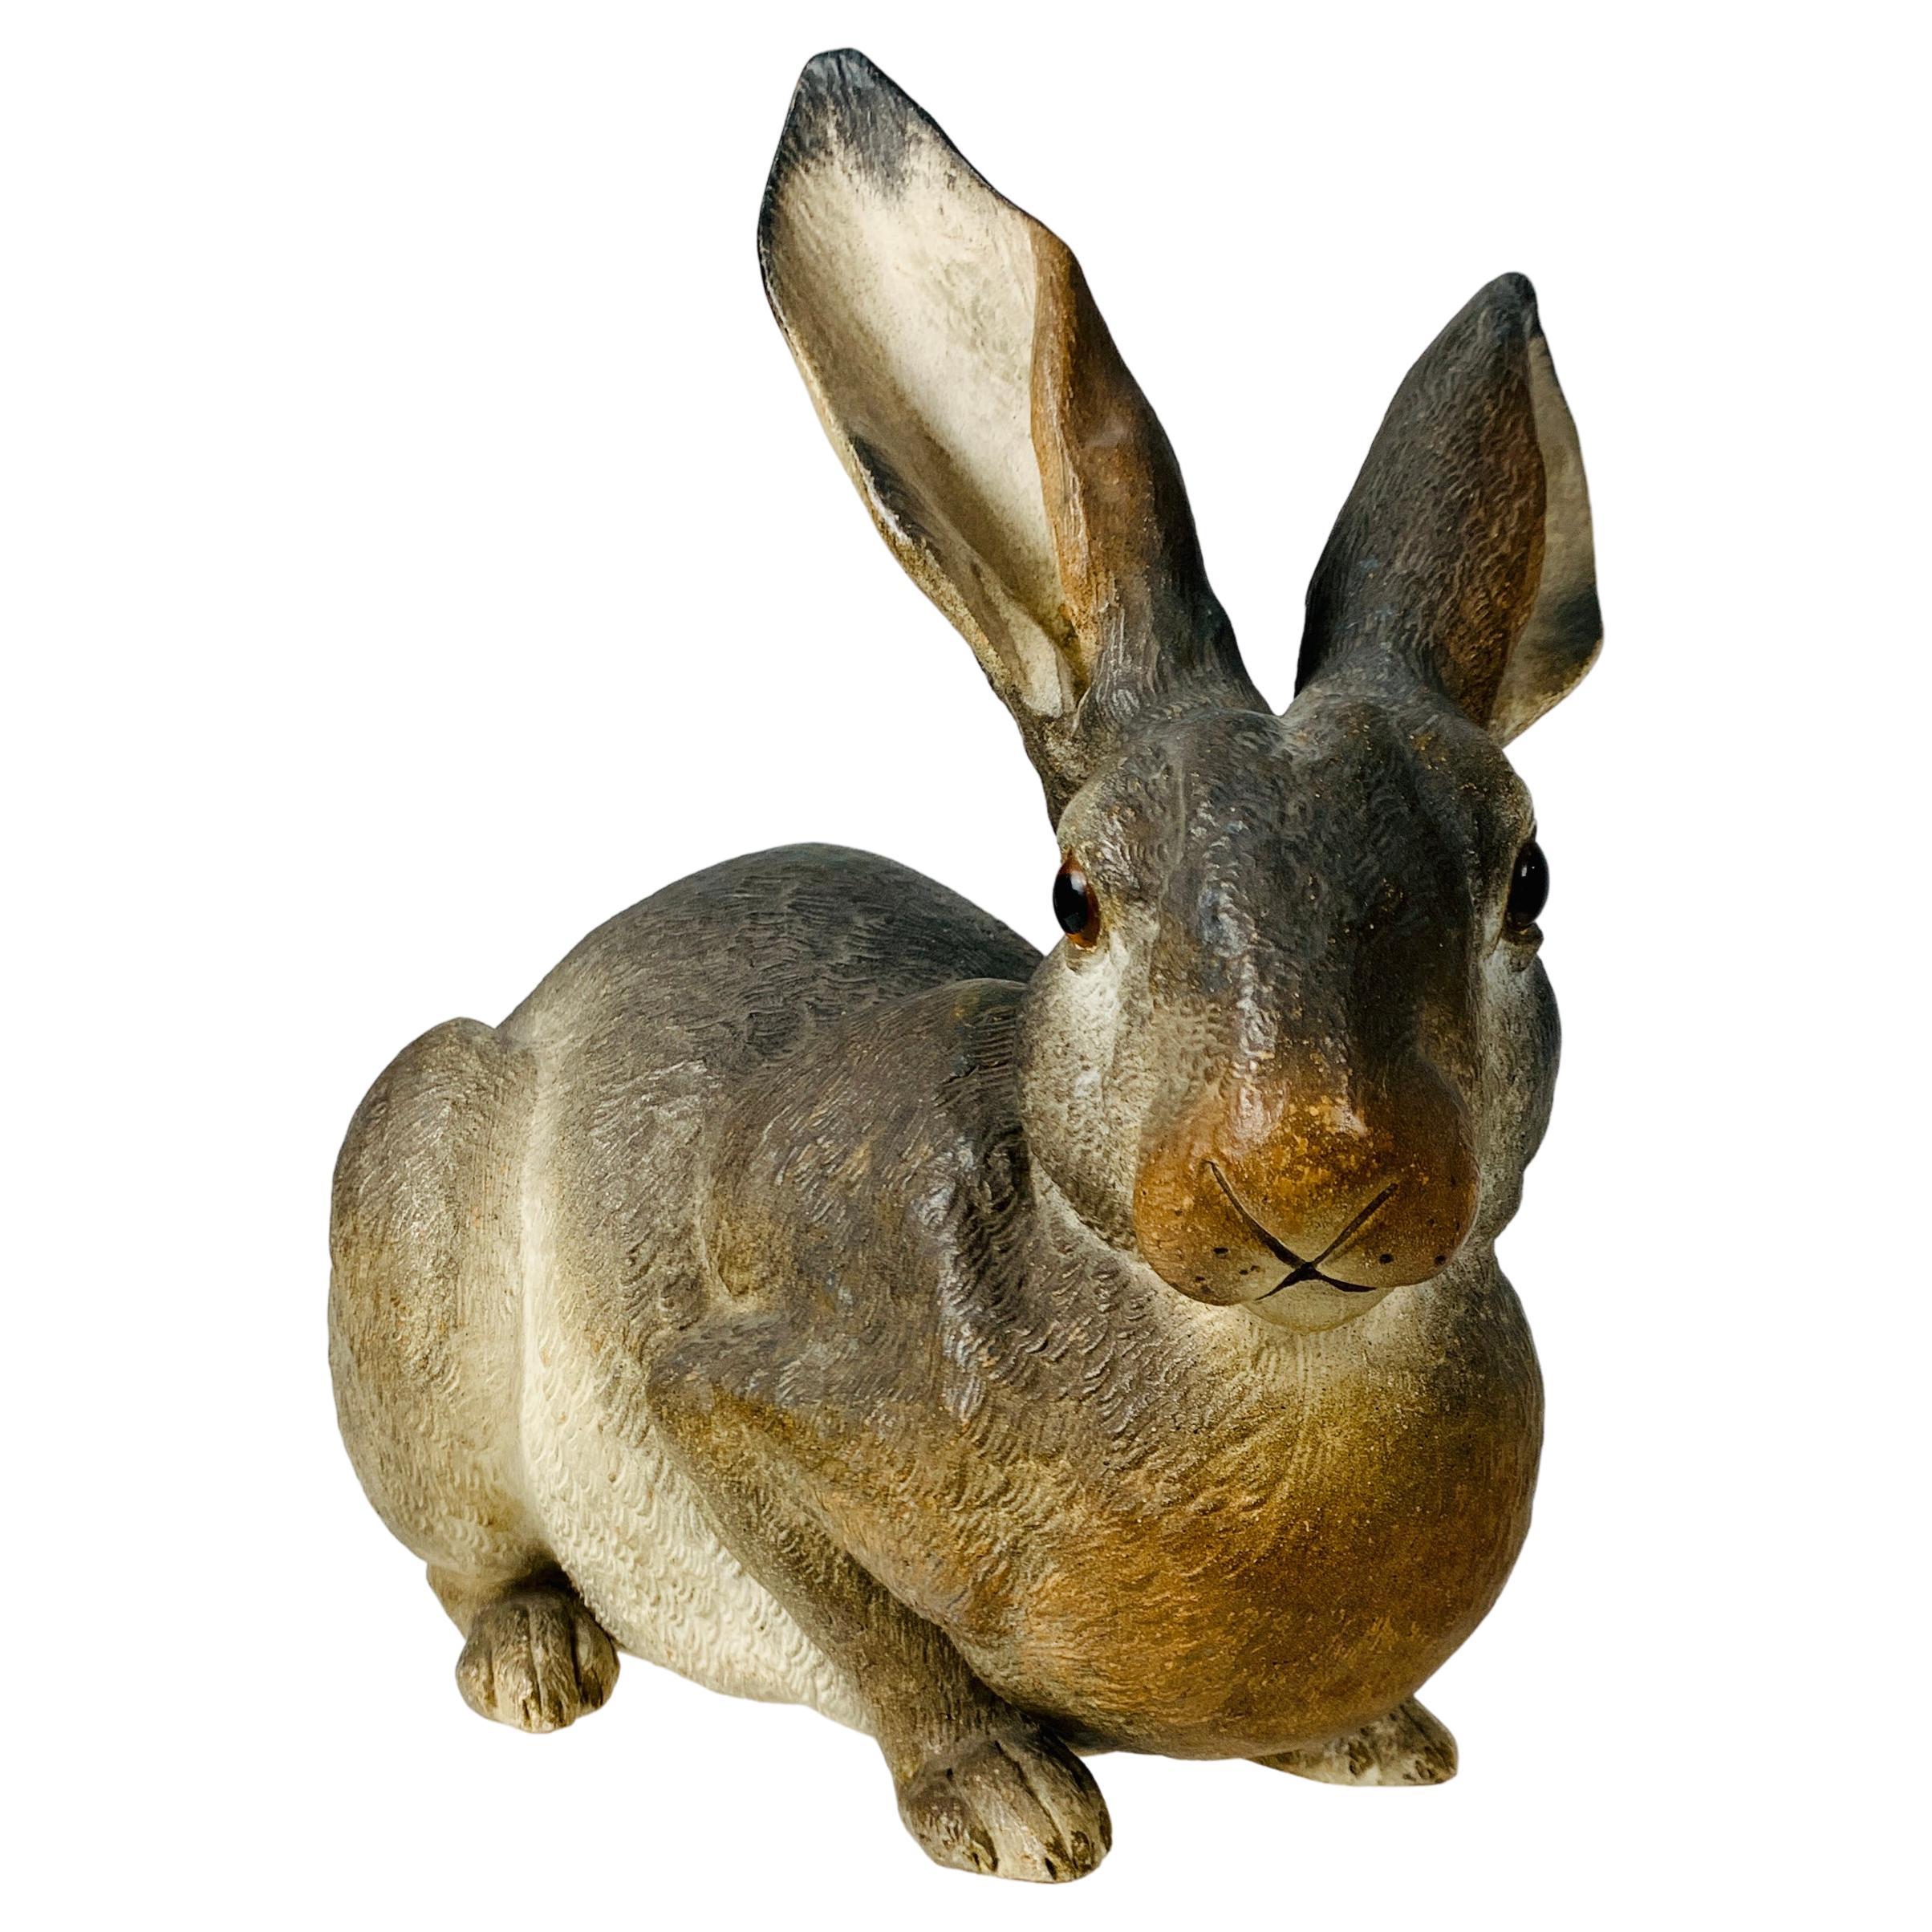 Animalia Life-Size Model of a Rabbit Hand-Painted Made of Terracotta